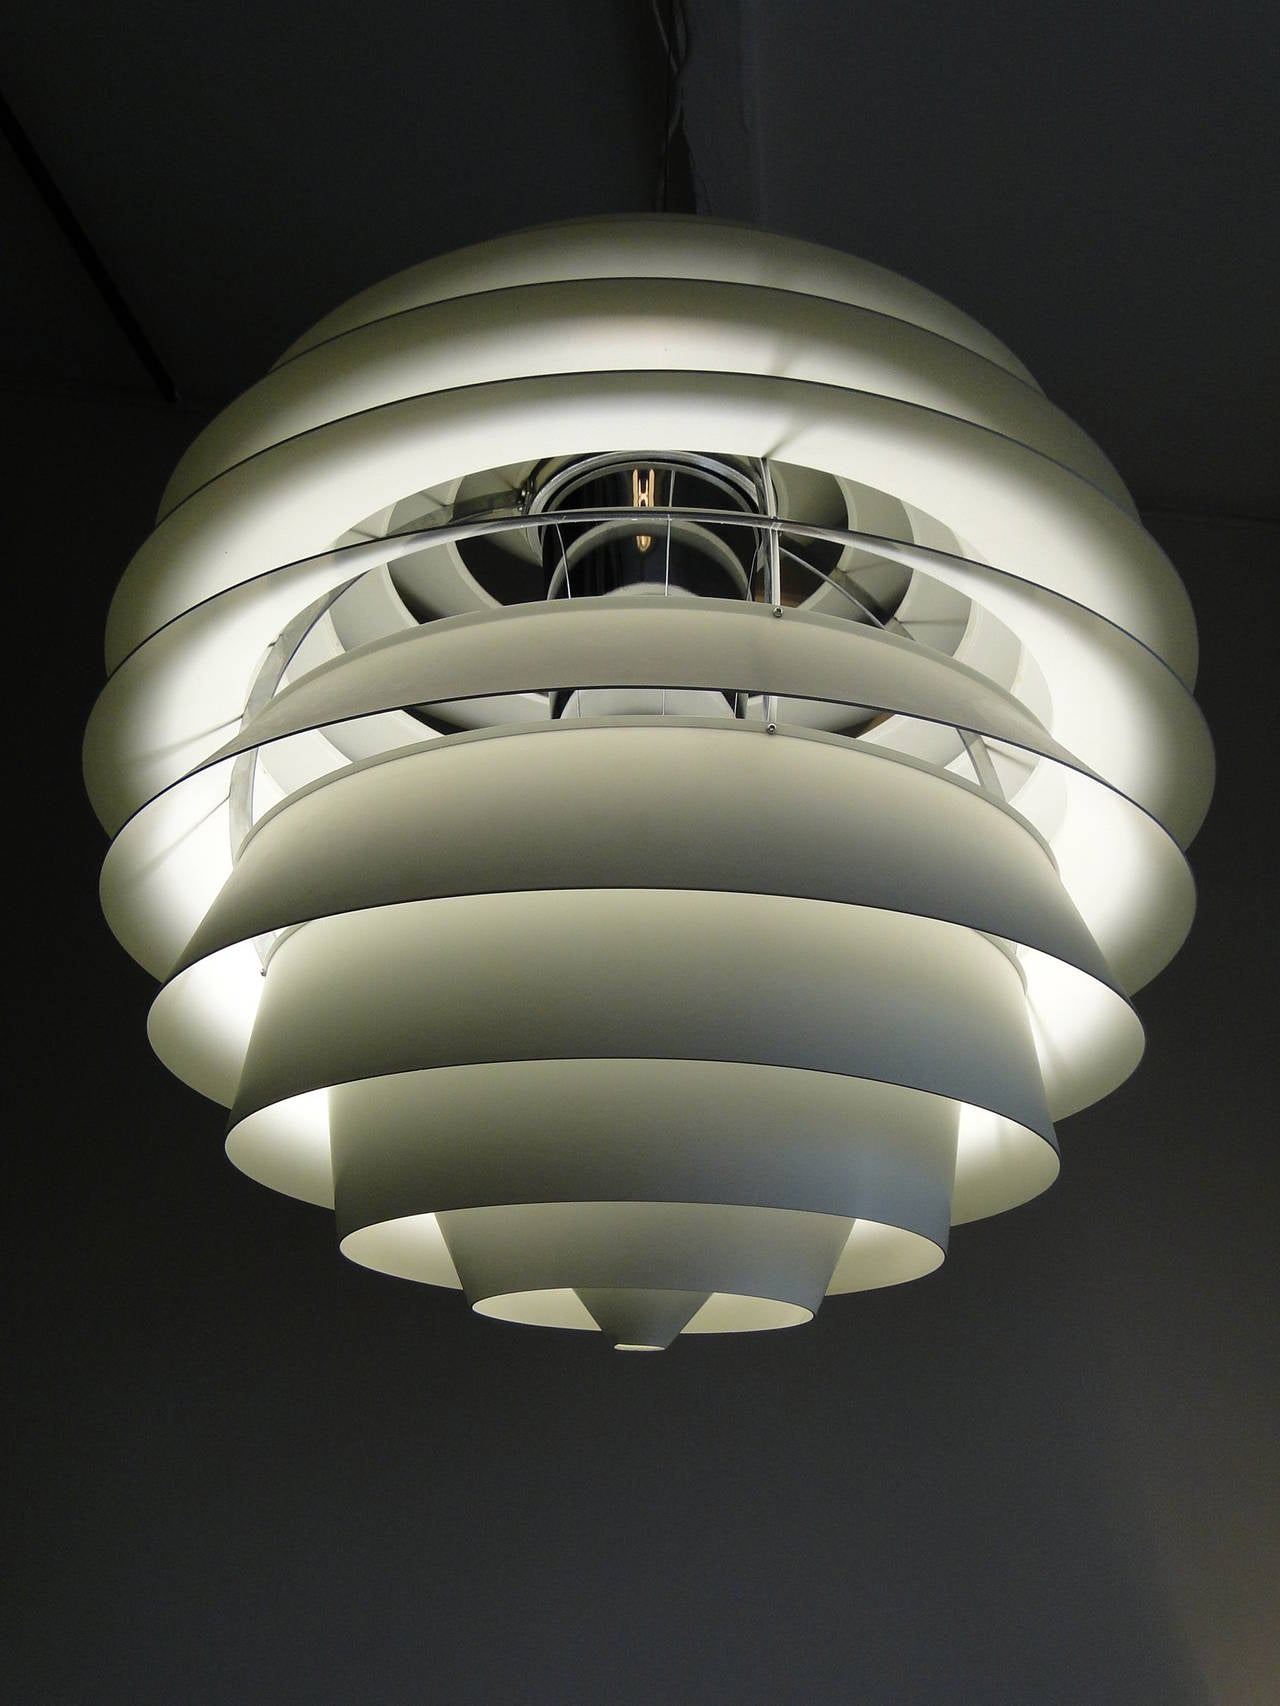 It is a stunning light designed by Poul Henningsen in 1957 for the Adventist Church in Skodsborg, Denmark. Clever stuff too - the PH Ball is a glare-free light, with all 13 colors (mounted on 4 legs) to provide light at the exact same angle and